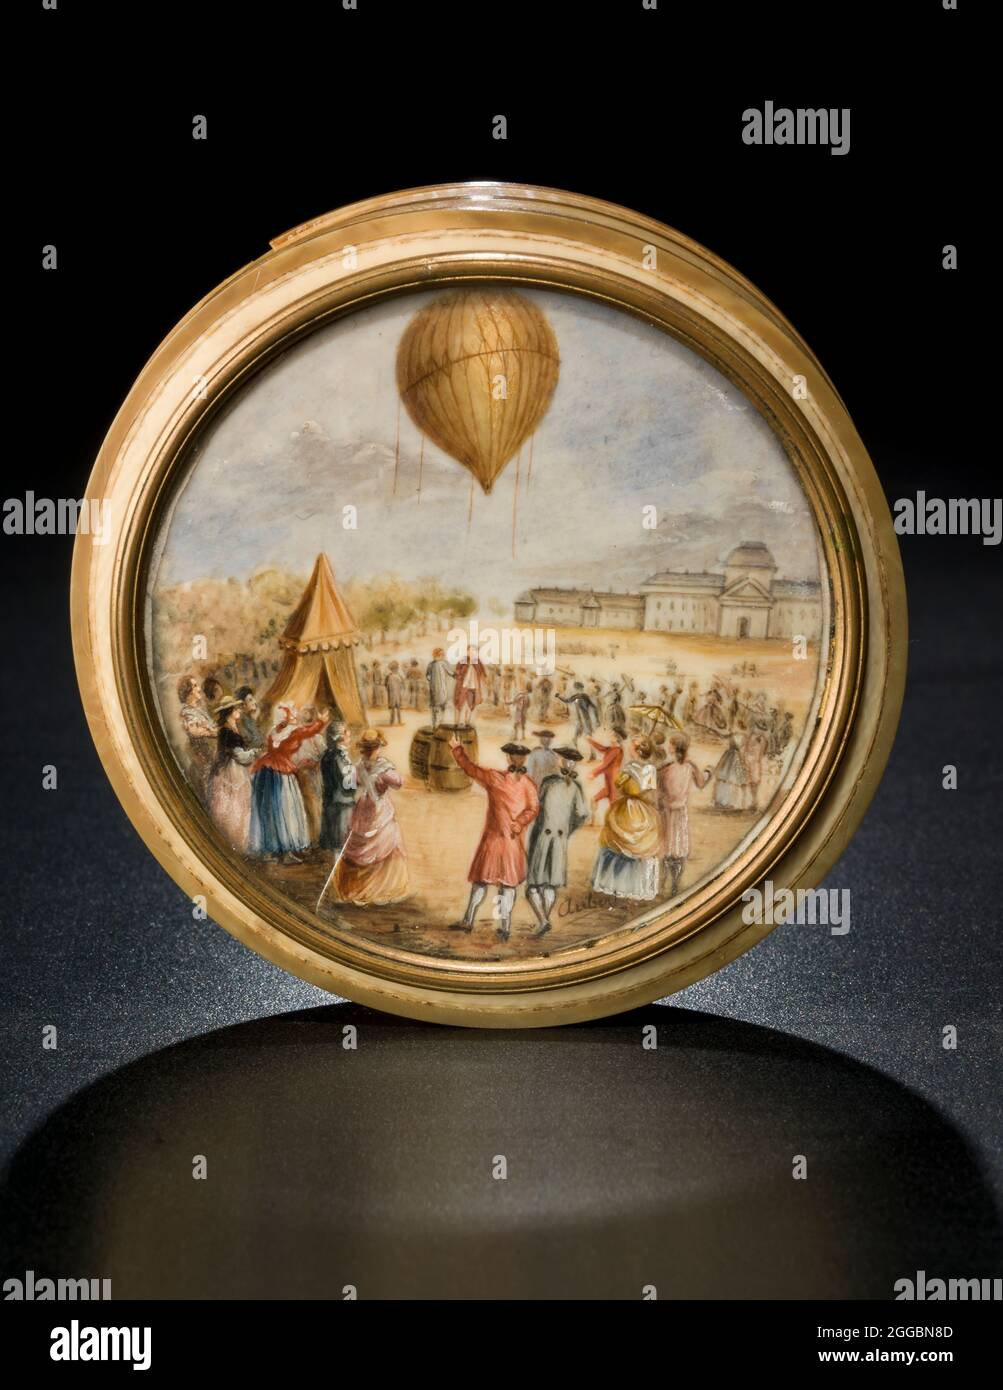 Snuff box with ballooning scene, late 18th century. The scene represents the launch of the first small Charliere gas balloon from the Champ de Mars in Paris, 27 August 1783. A small applauding crowd is gathered, and two men are shaking hands. The hydrogen generating barrels are shown. Round ivory snuff box with a ballooning scene painted on ivory set into the lid. The painting is signed 'Aubert,' and is under glass in a copper alloy frame. The box is made from multiple pieces of ivory glued together. Bands of a different shade of ivory are inset into the edges of the box. Stock Photo